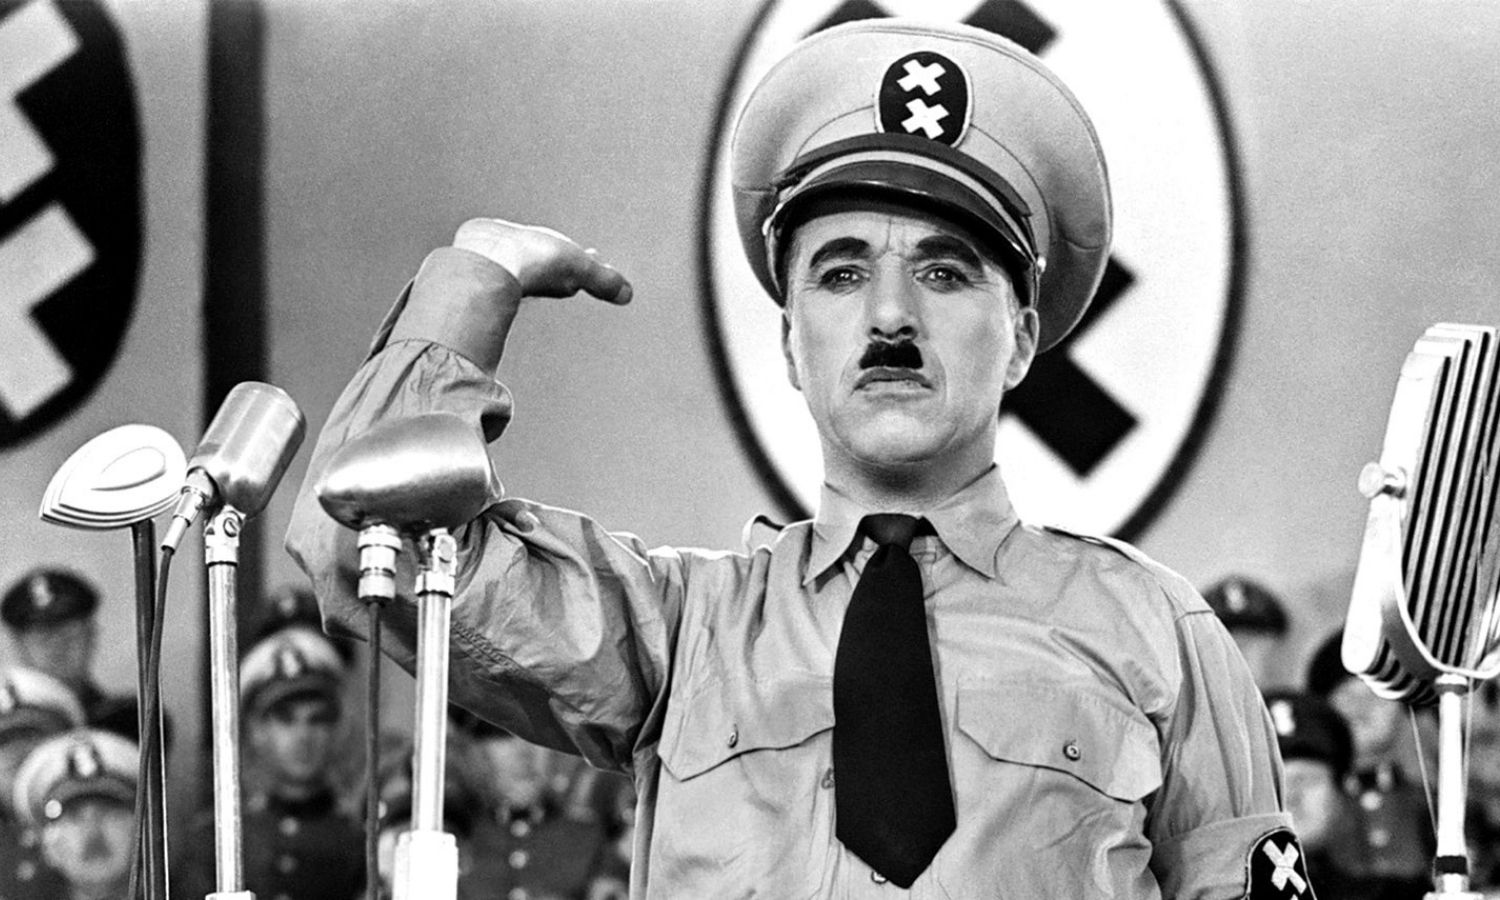 OTD in 1940: Charlie Chaplin's satirical movie "The Great Dictator" was released in the US.